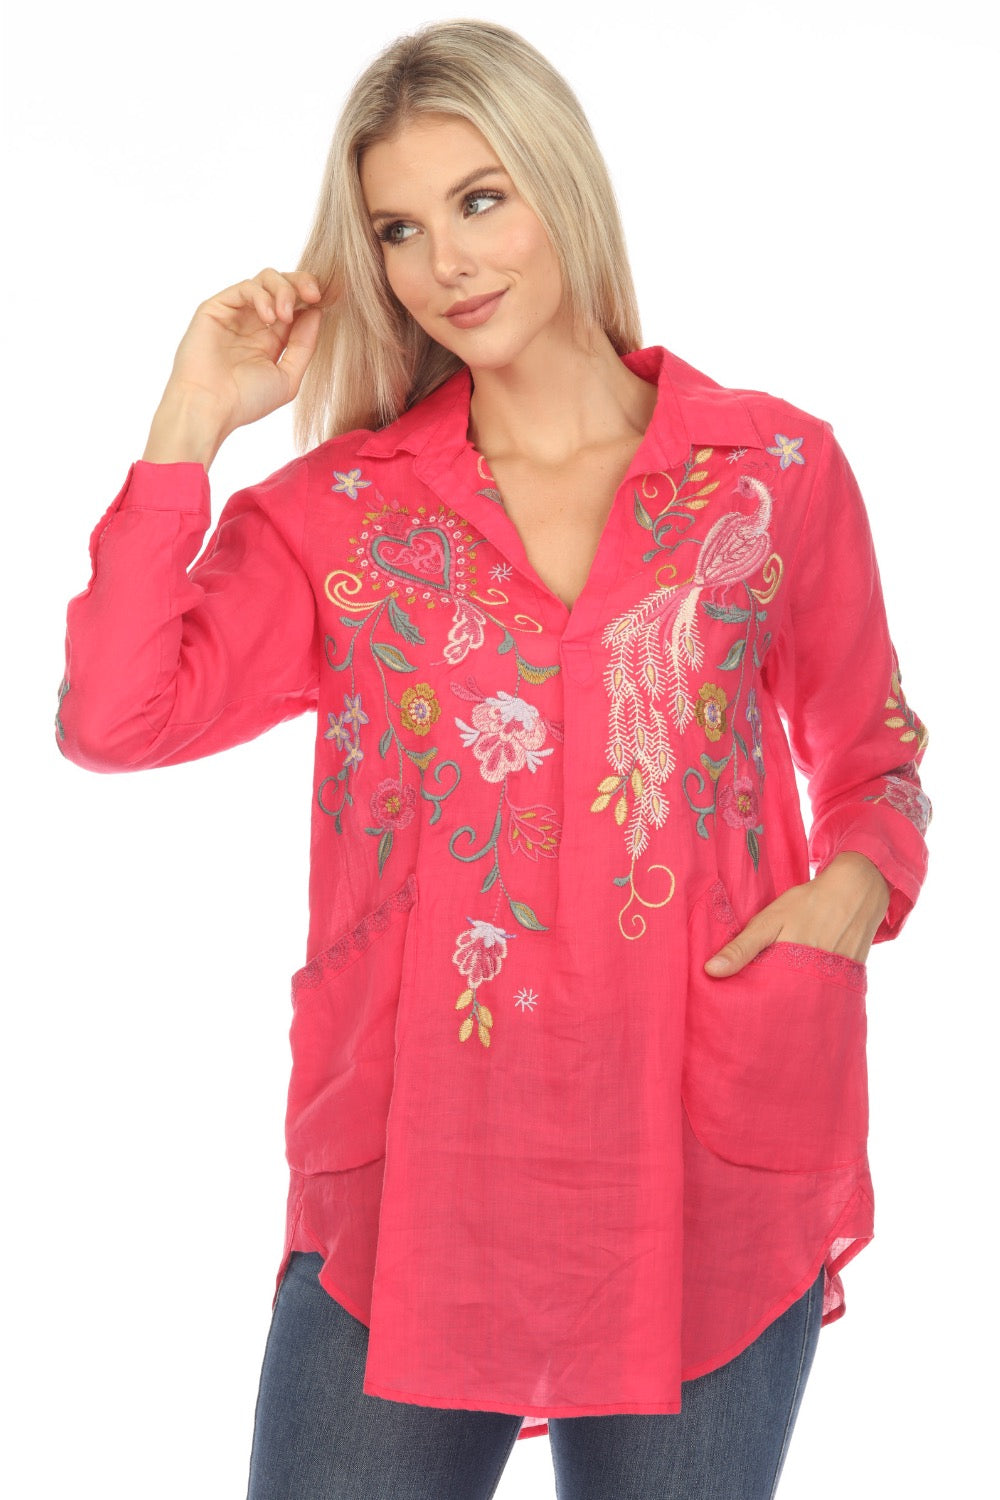 Johnny Was Workshop Ashlee Henley Popover Embroidered Tunic Top Boho C ...